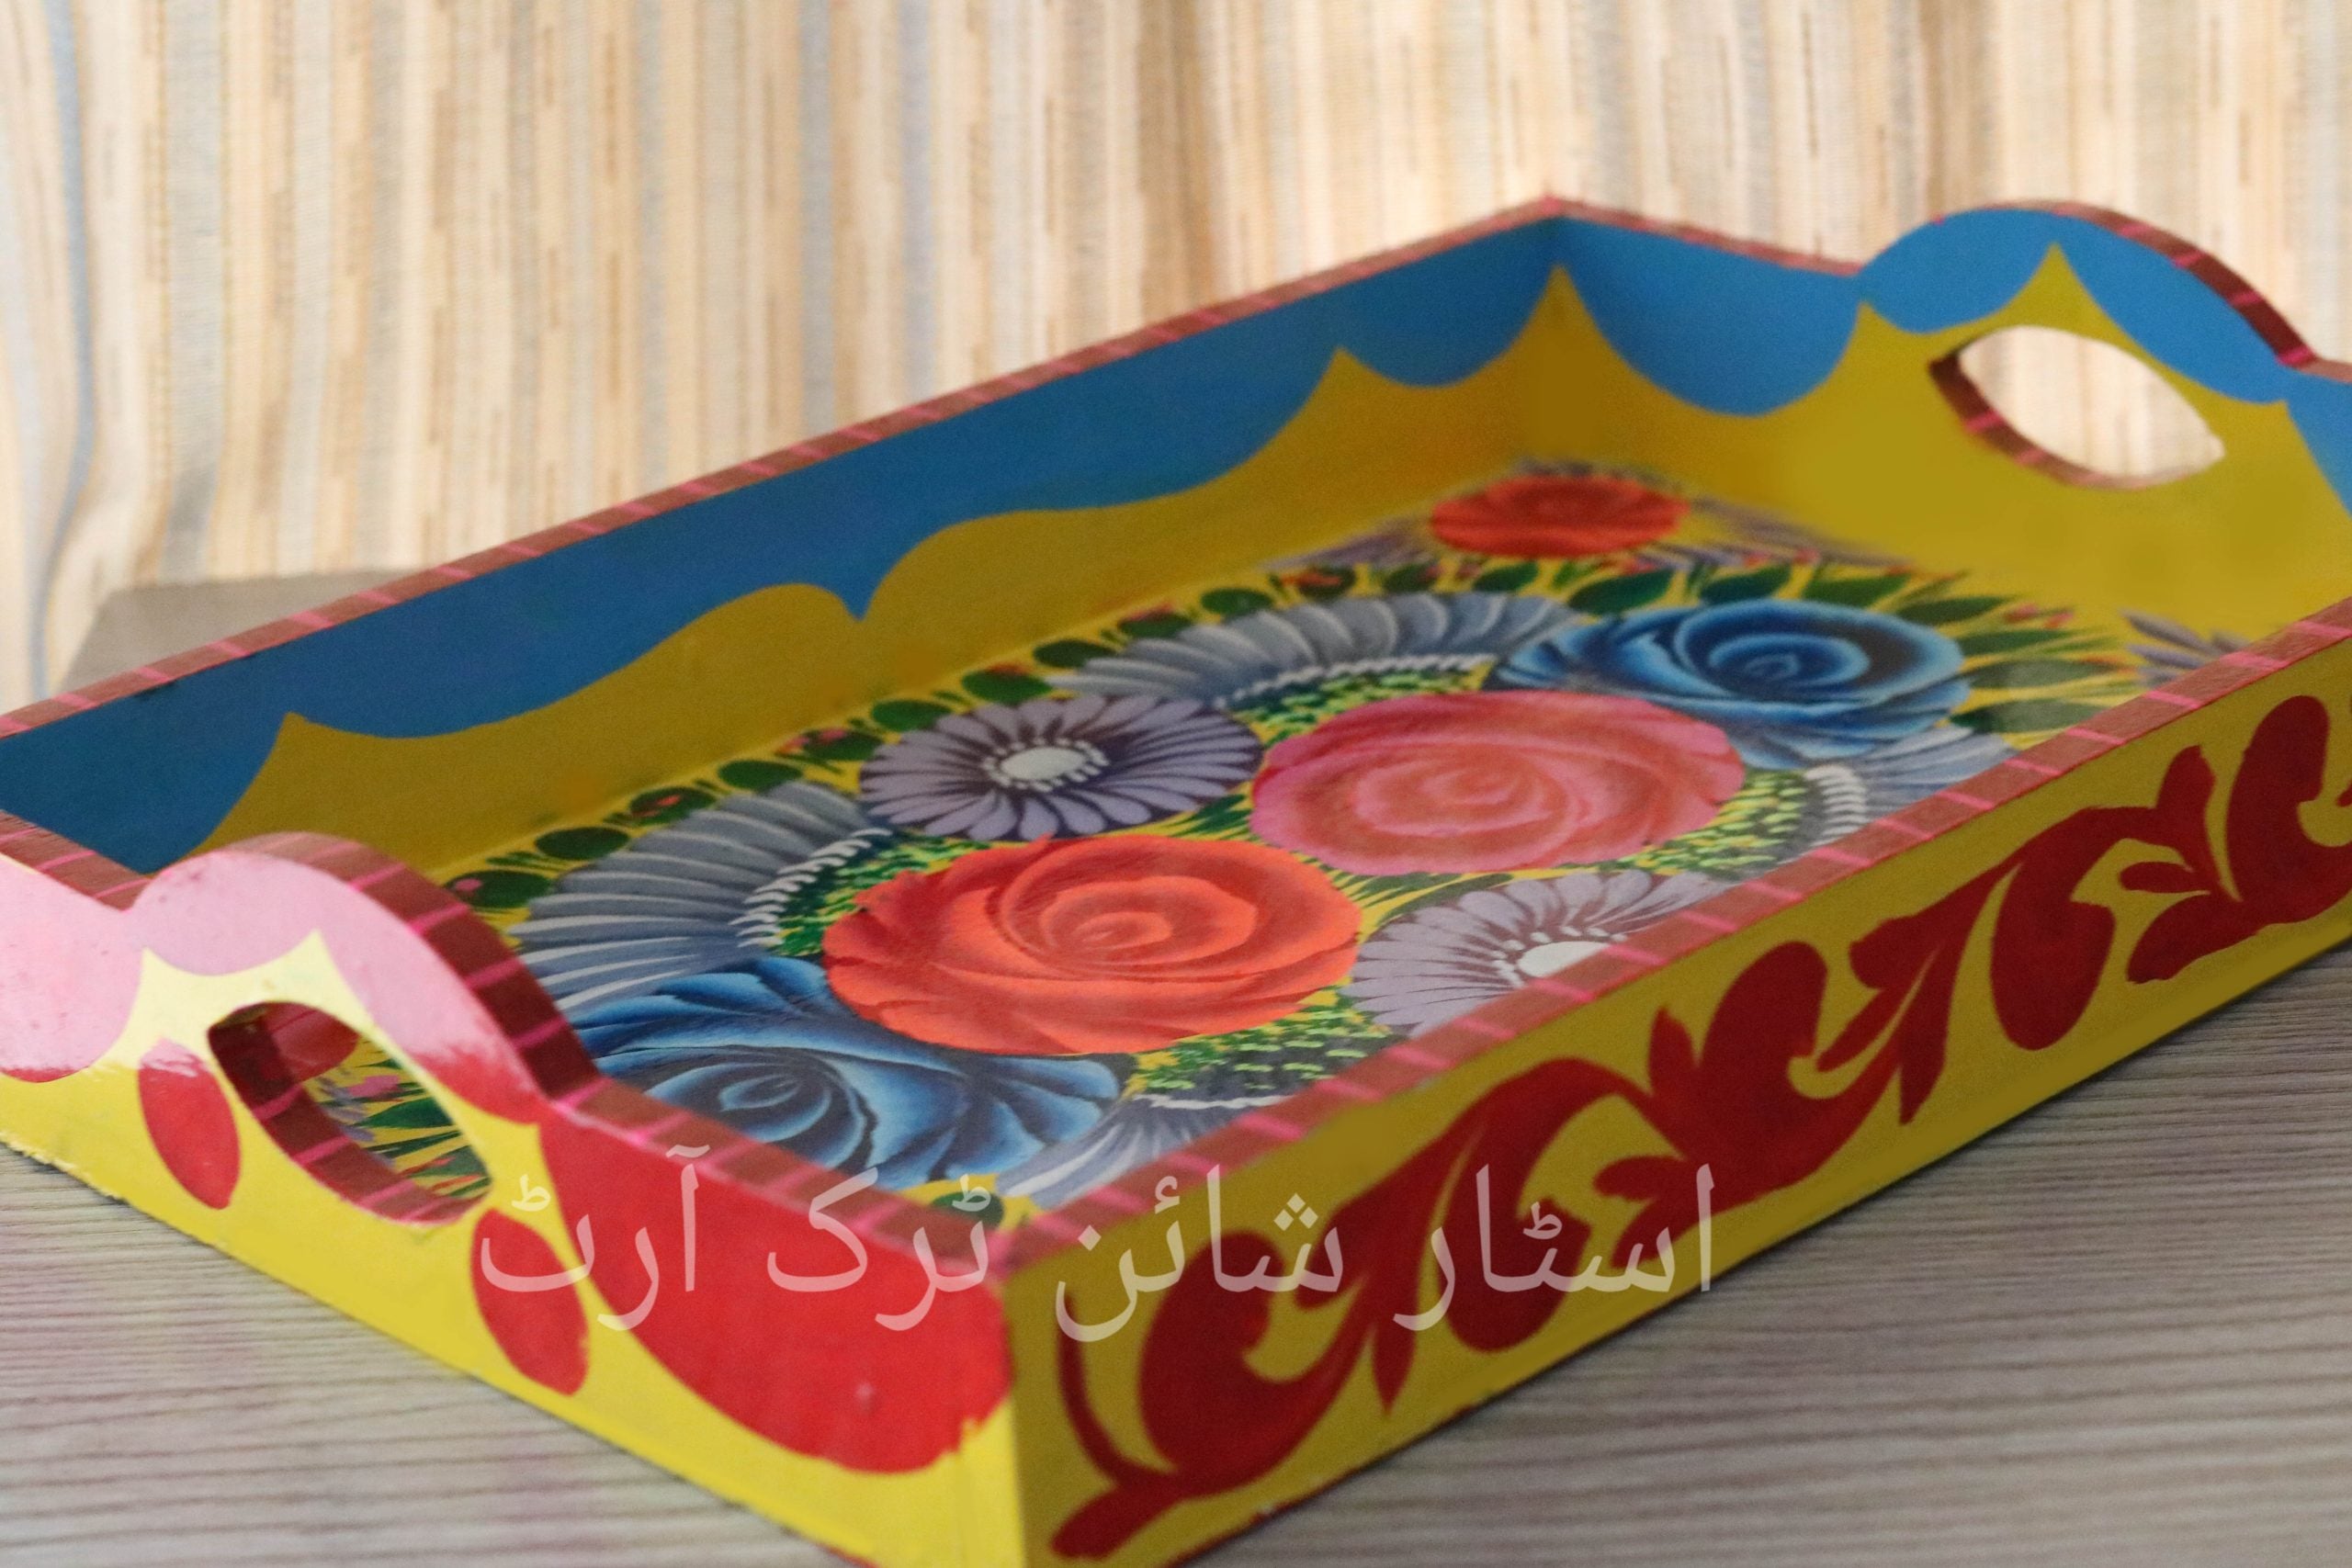 Hand-Painted Wooden Tray with Colorful Truck Art Floral Motifs